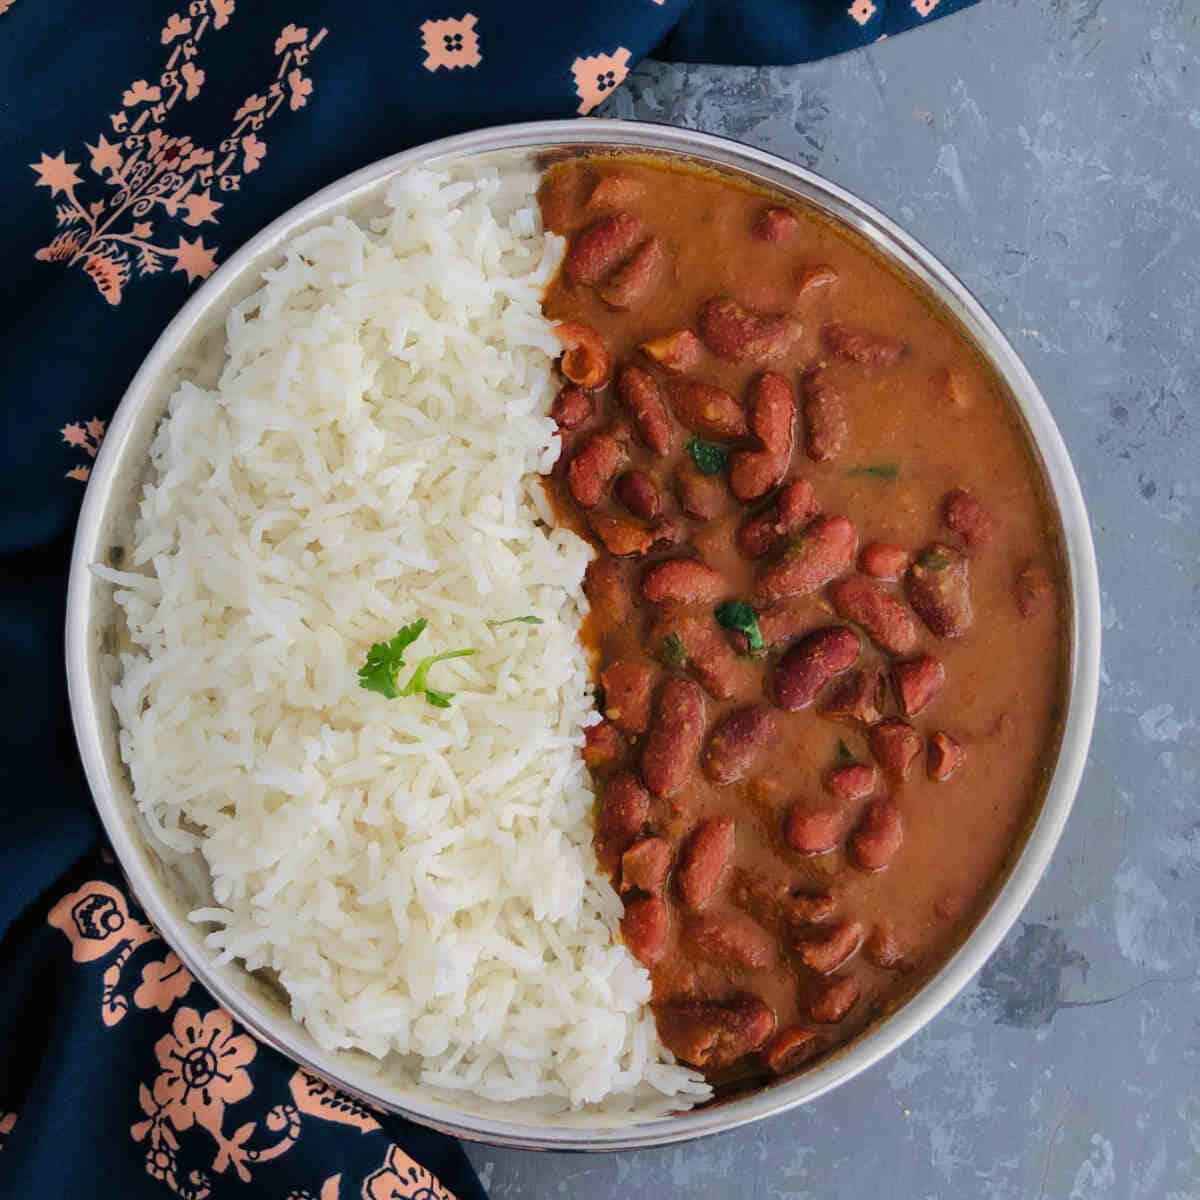 rajma served with steamed rice.